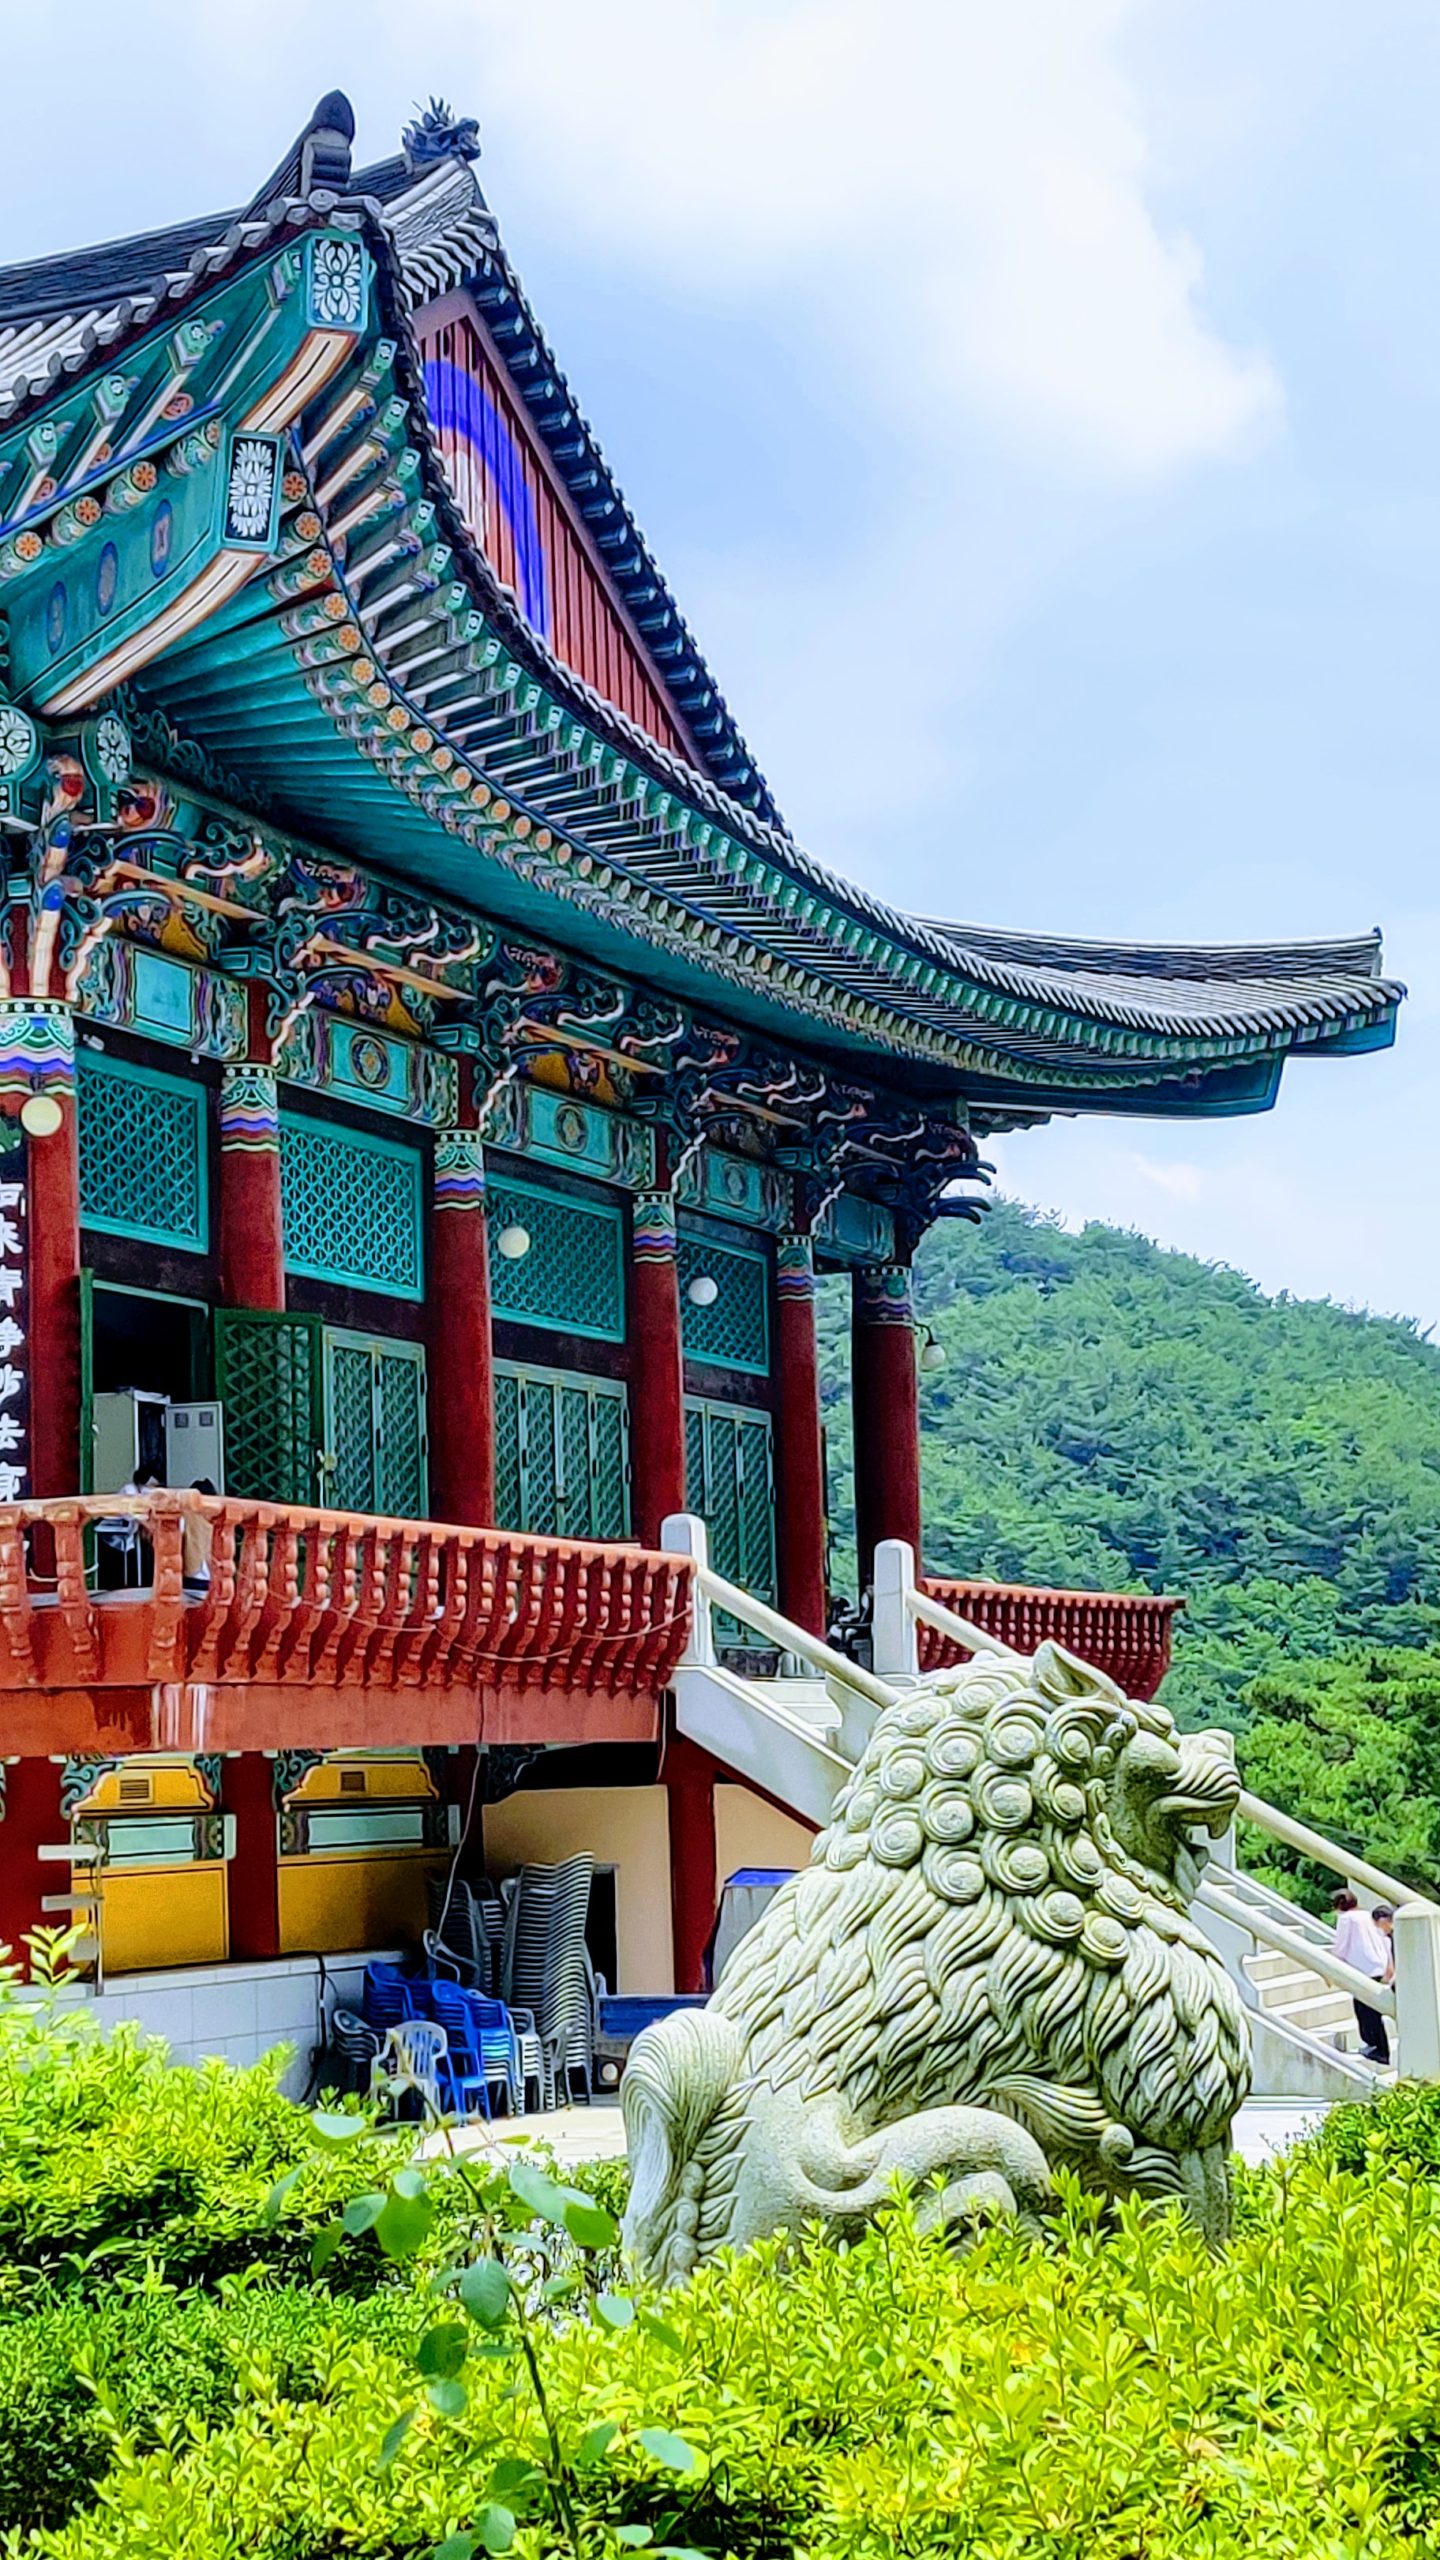 a larger-than-life buddhist structure in south korea covered with a lion sculpture Donghwasa Daegu